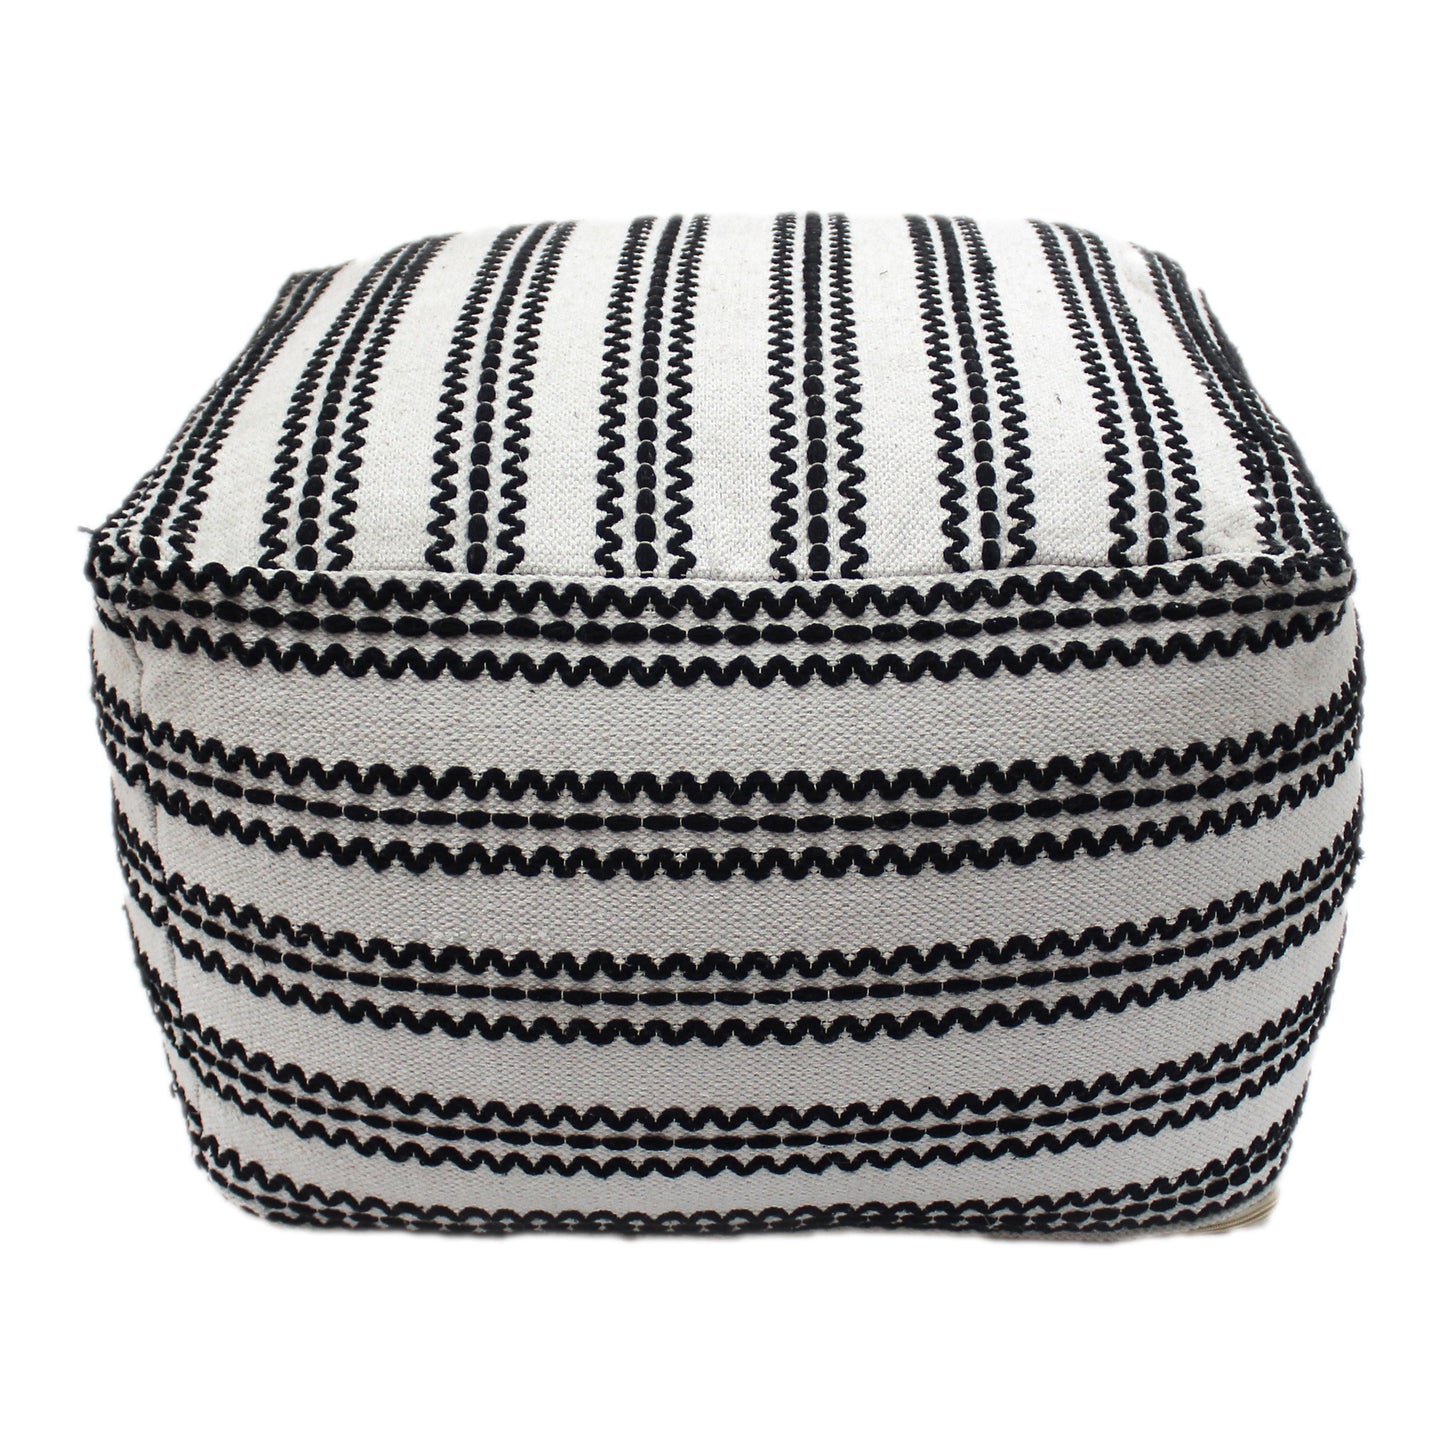 Lillian Large Square Casual Pouf, Contemporary, Black and Natural Cotton